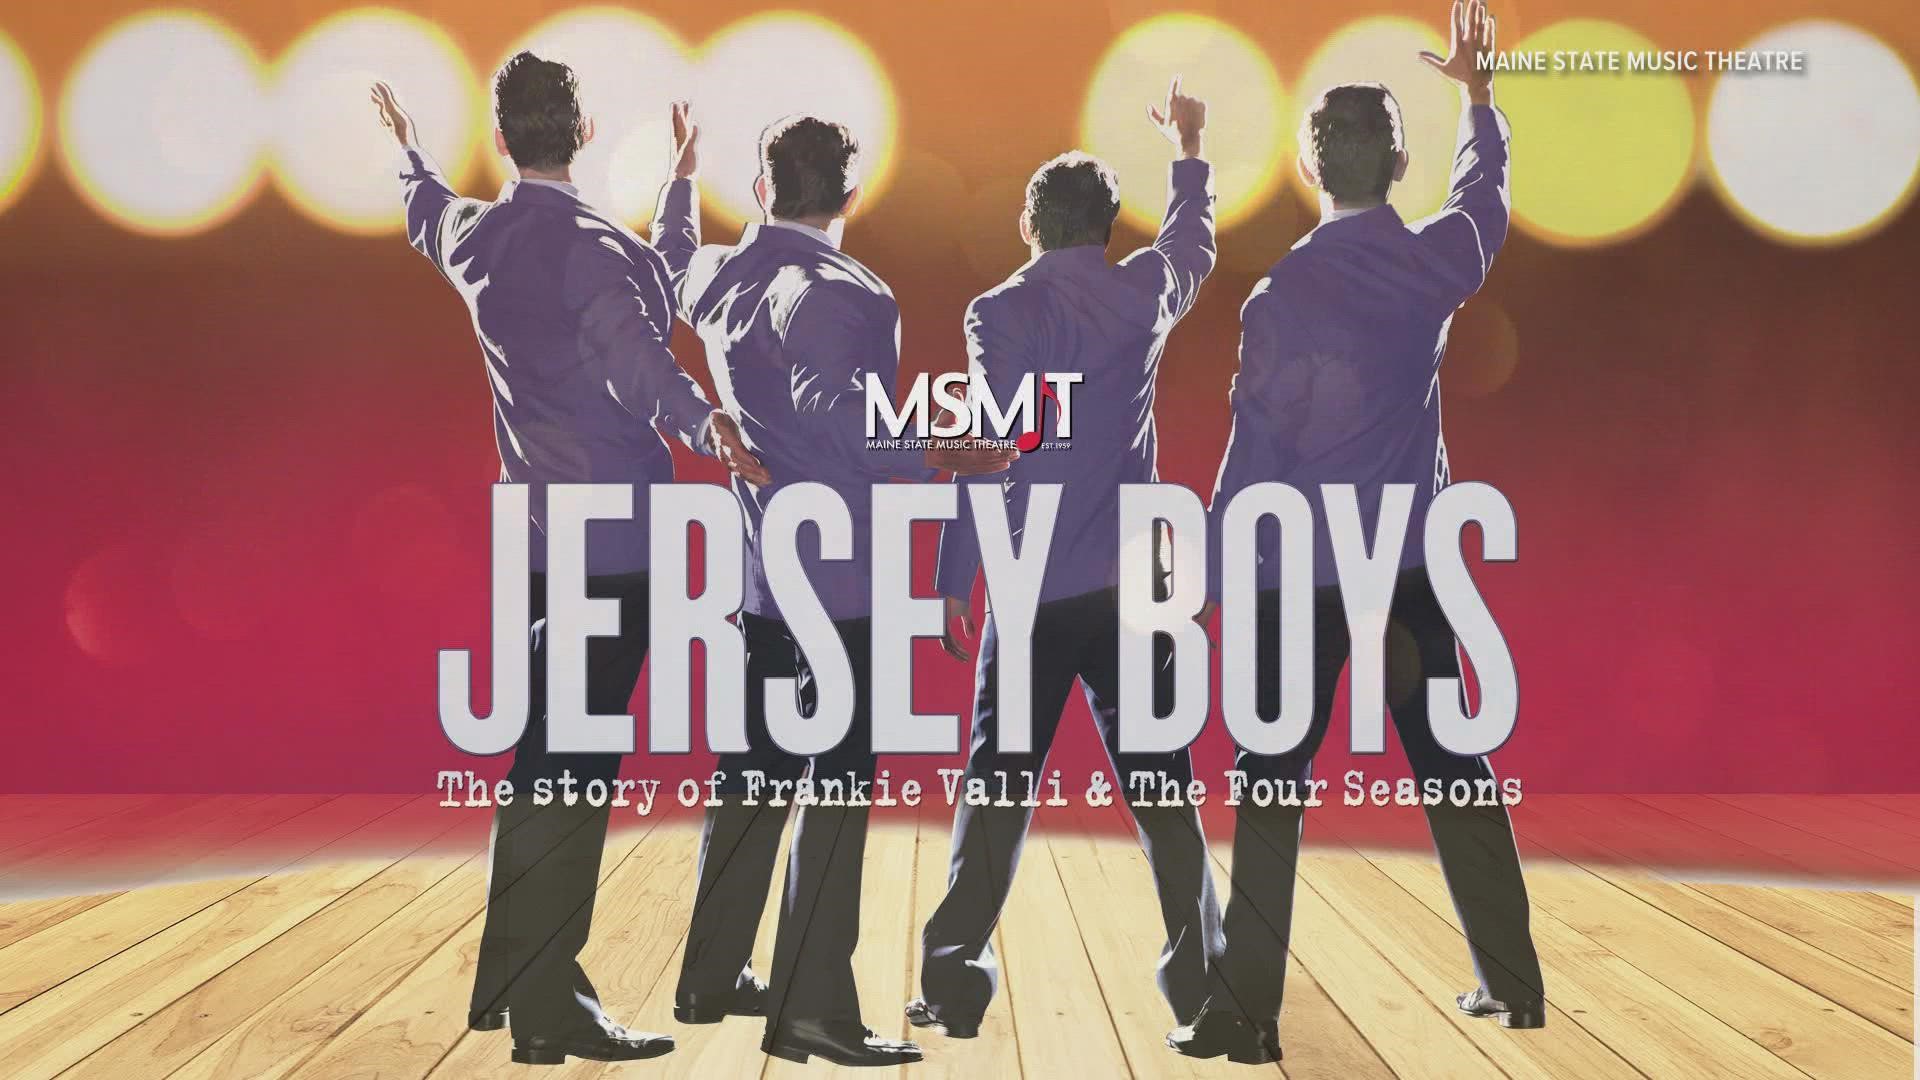 "Jersey Boys" runs from Sept. 1 to Sept. 19. After that, audiences will have to wait until 2022 to see a show produced by the theater.